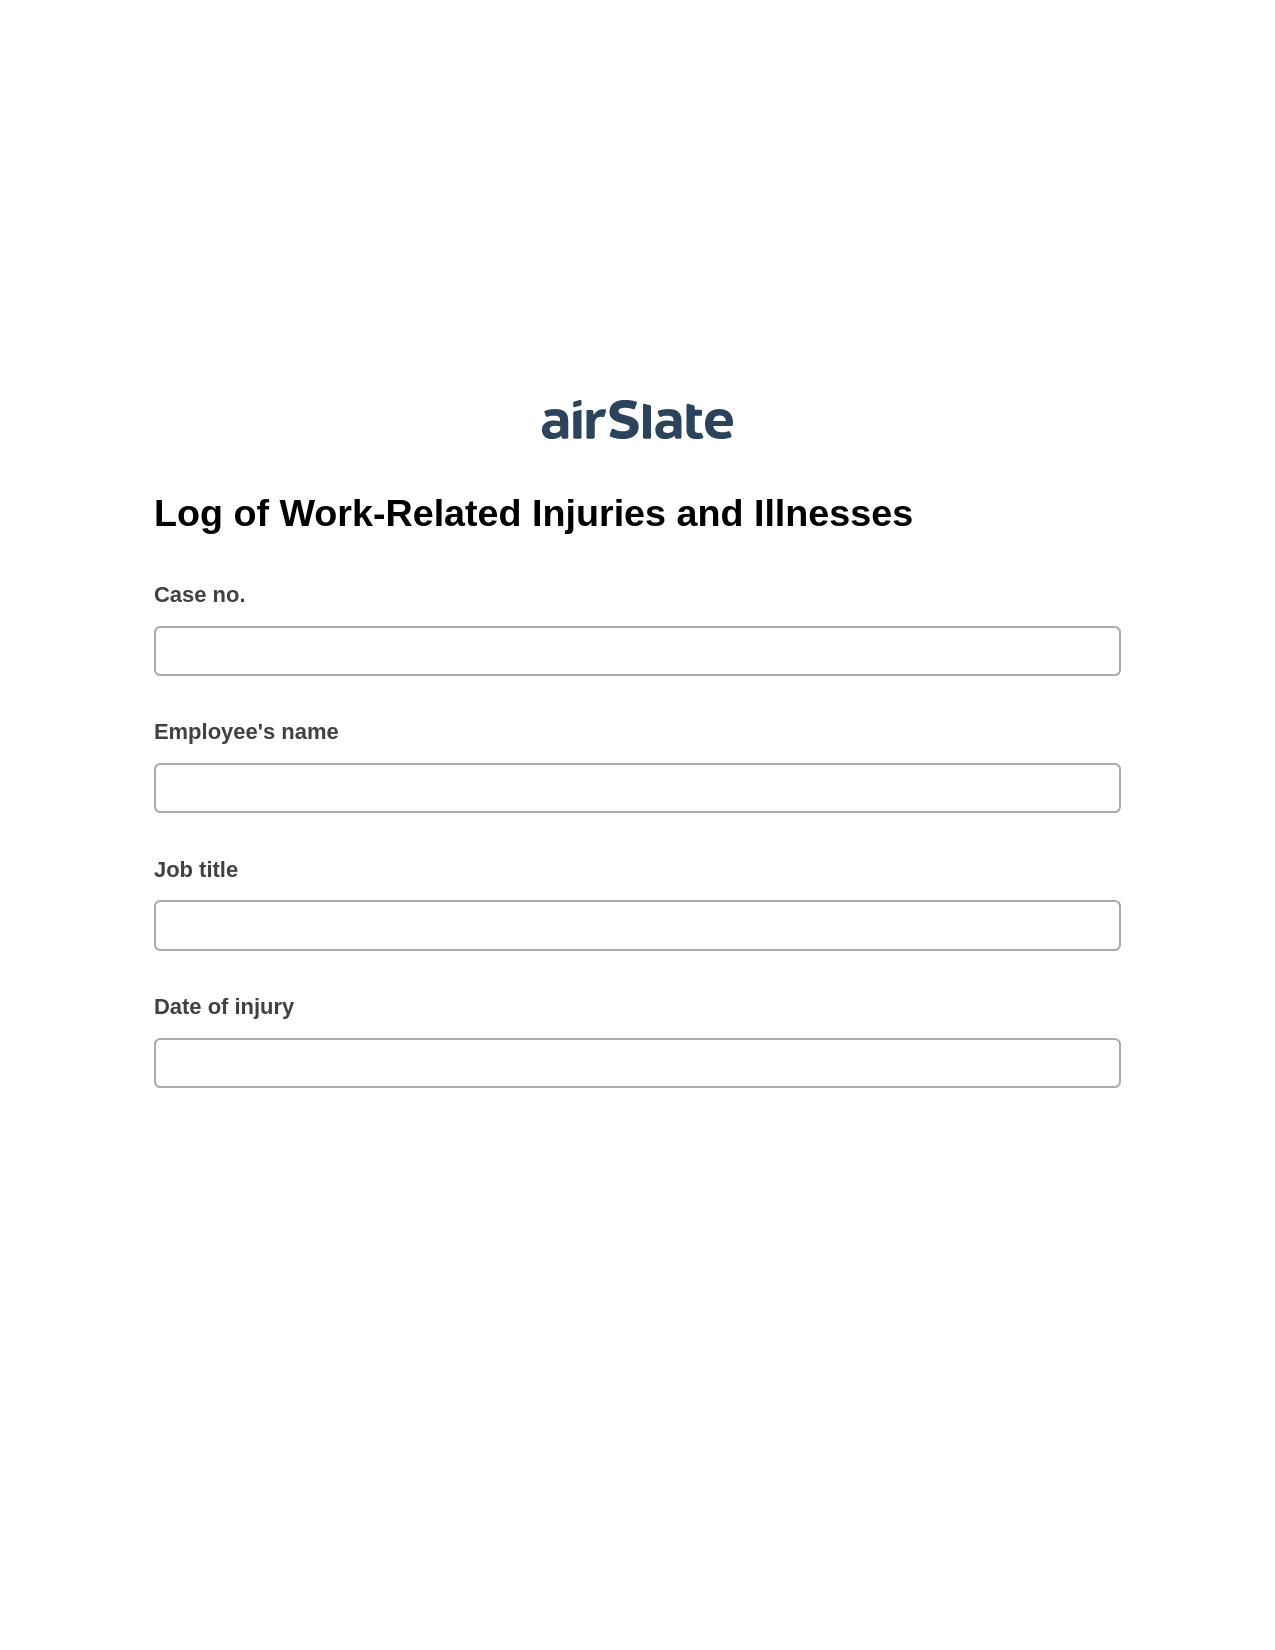 Log of Work-Related Injuries and Illnesses Pre-fill from Smartsheet Bot, Document Hide Bot, Export to Excel 365 Bot